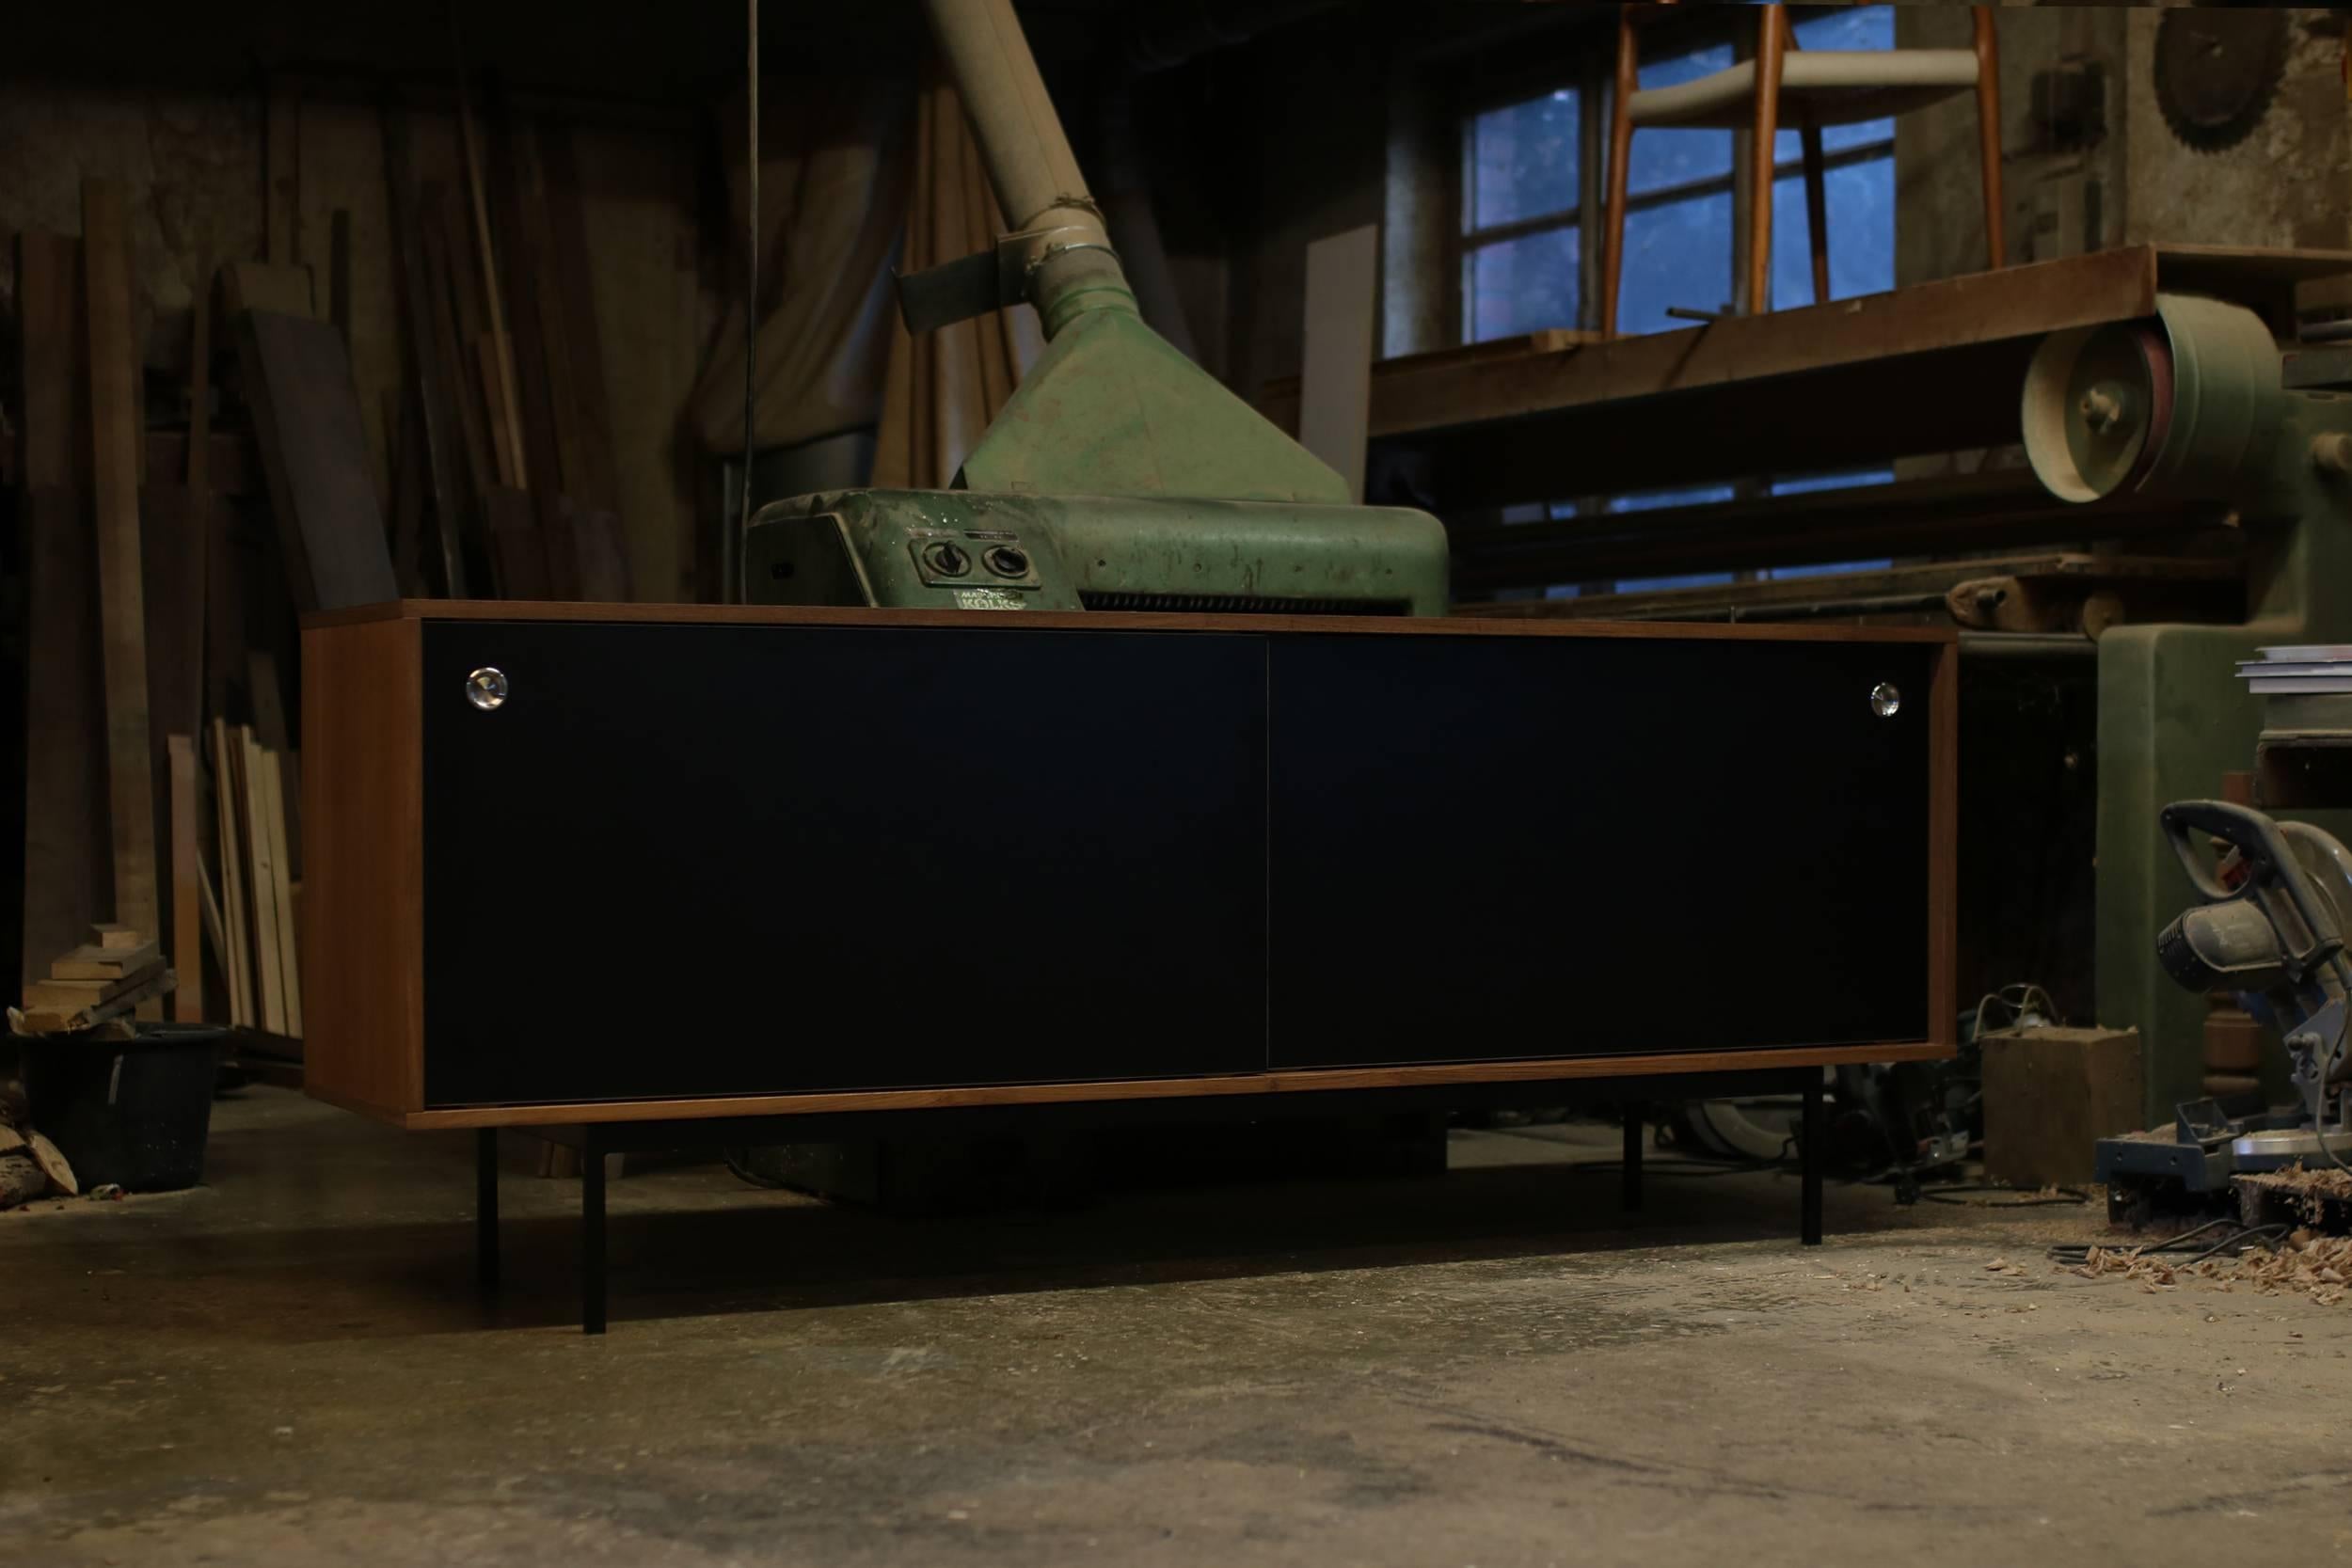 Beautiful teak sideboard, freestanding, made in Germany, design by Nathan Lindberg (Nathan Lindberg Design)
Black HPL (Formica) sliding doors with stainless steel door handles, iron base powder coated in black.
Best condition, the sideboard was